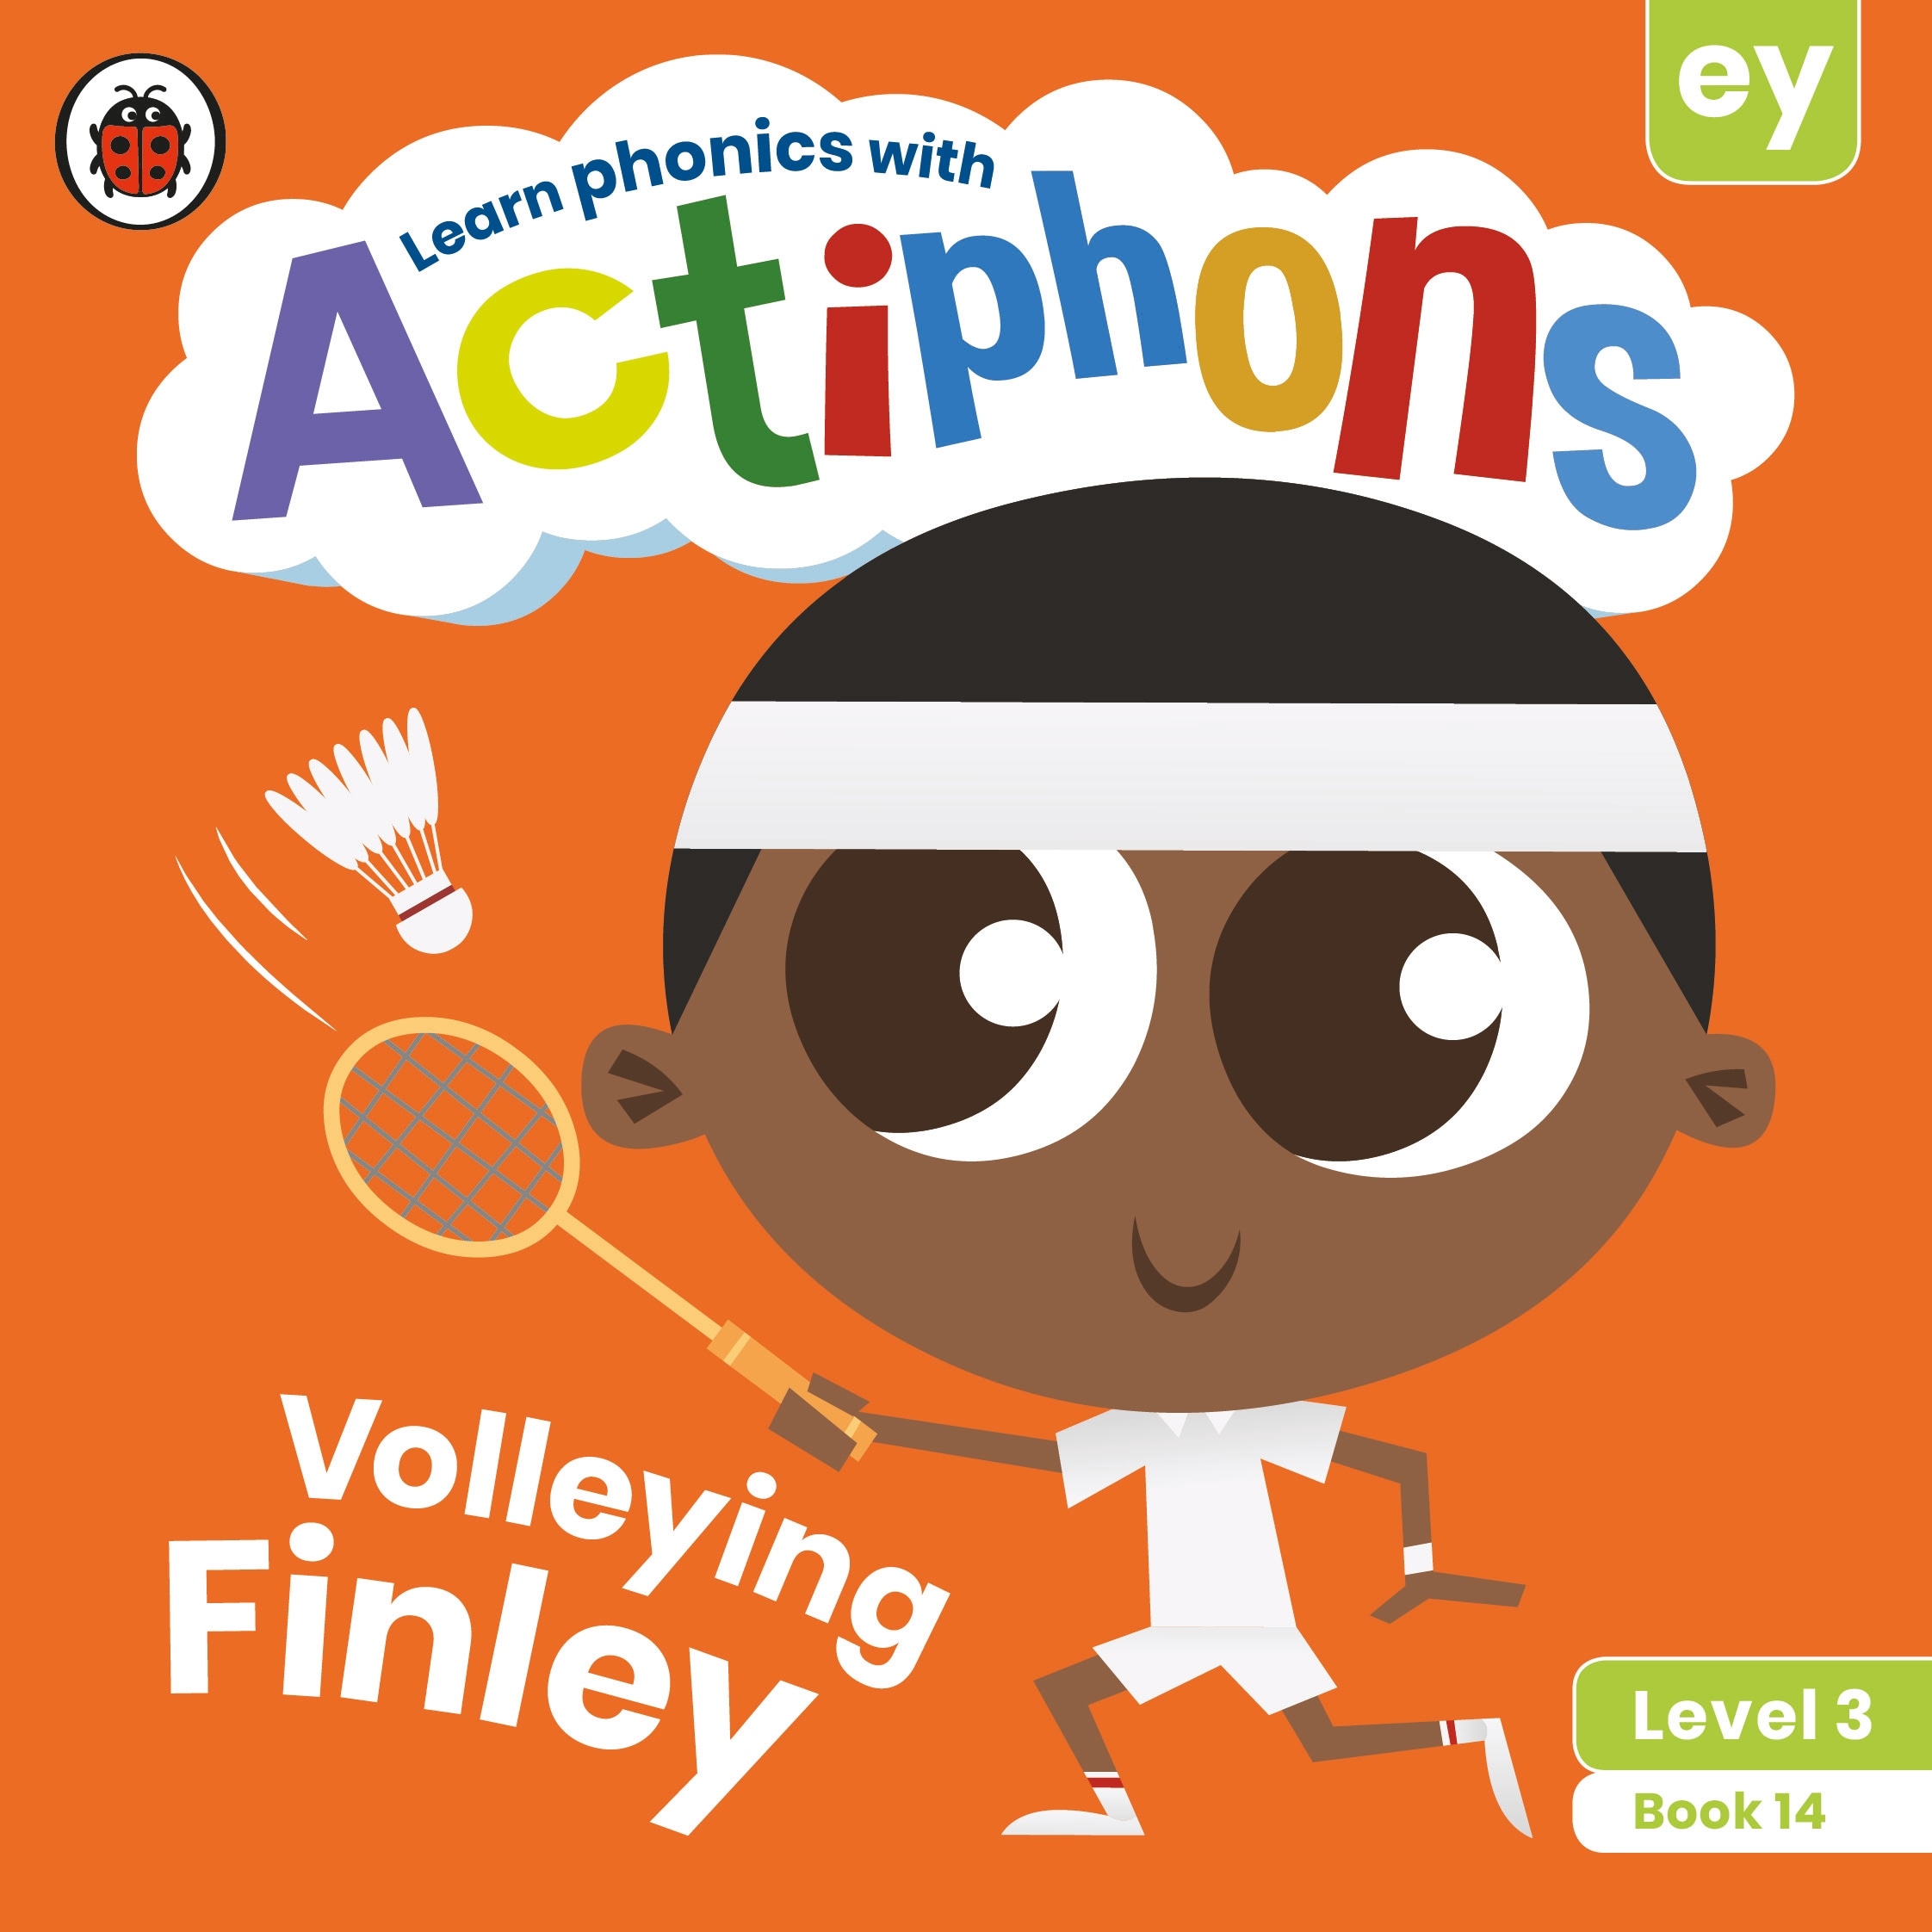 Actiphons Level 3 Book 14 Volleying Finley